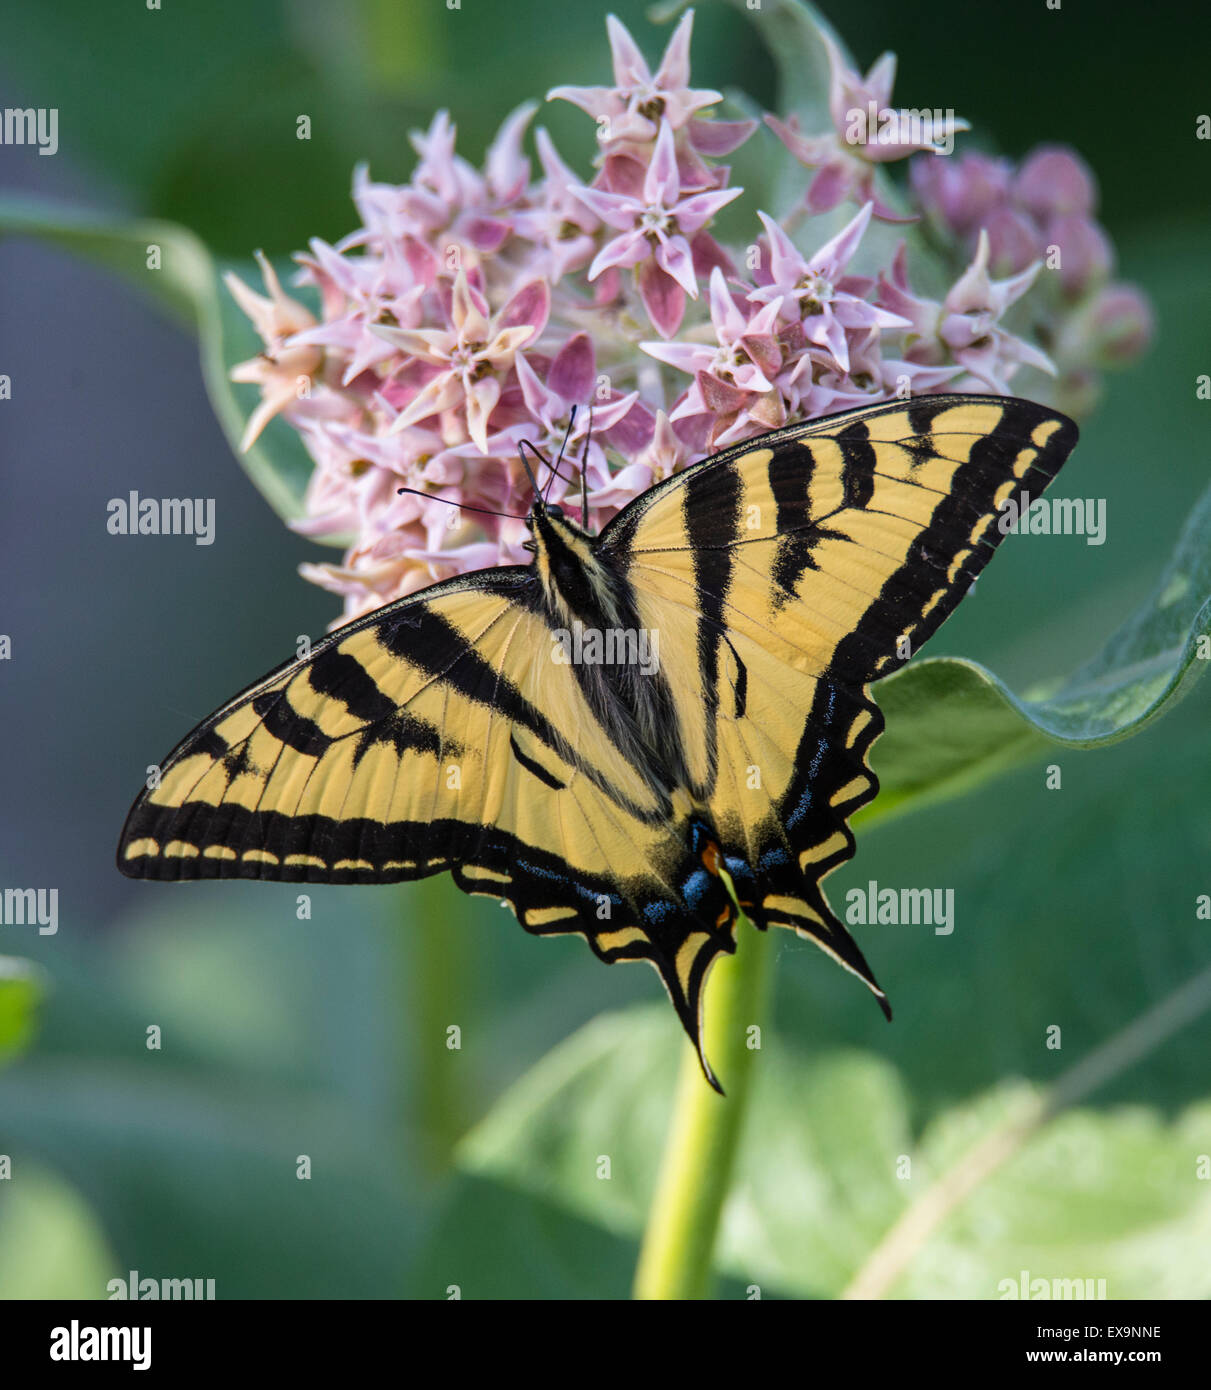 Butterflys, Eastern Tiger Swallowtail Butterfly feeding on nector from a Blooming Milkweed Plant. Idaho, USA Stock Photo